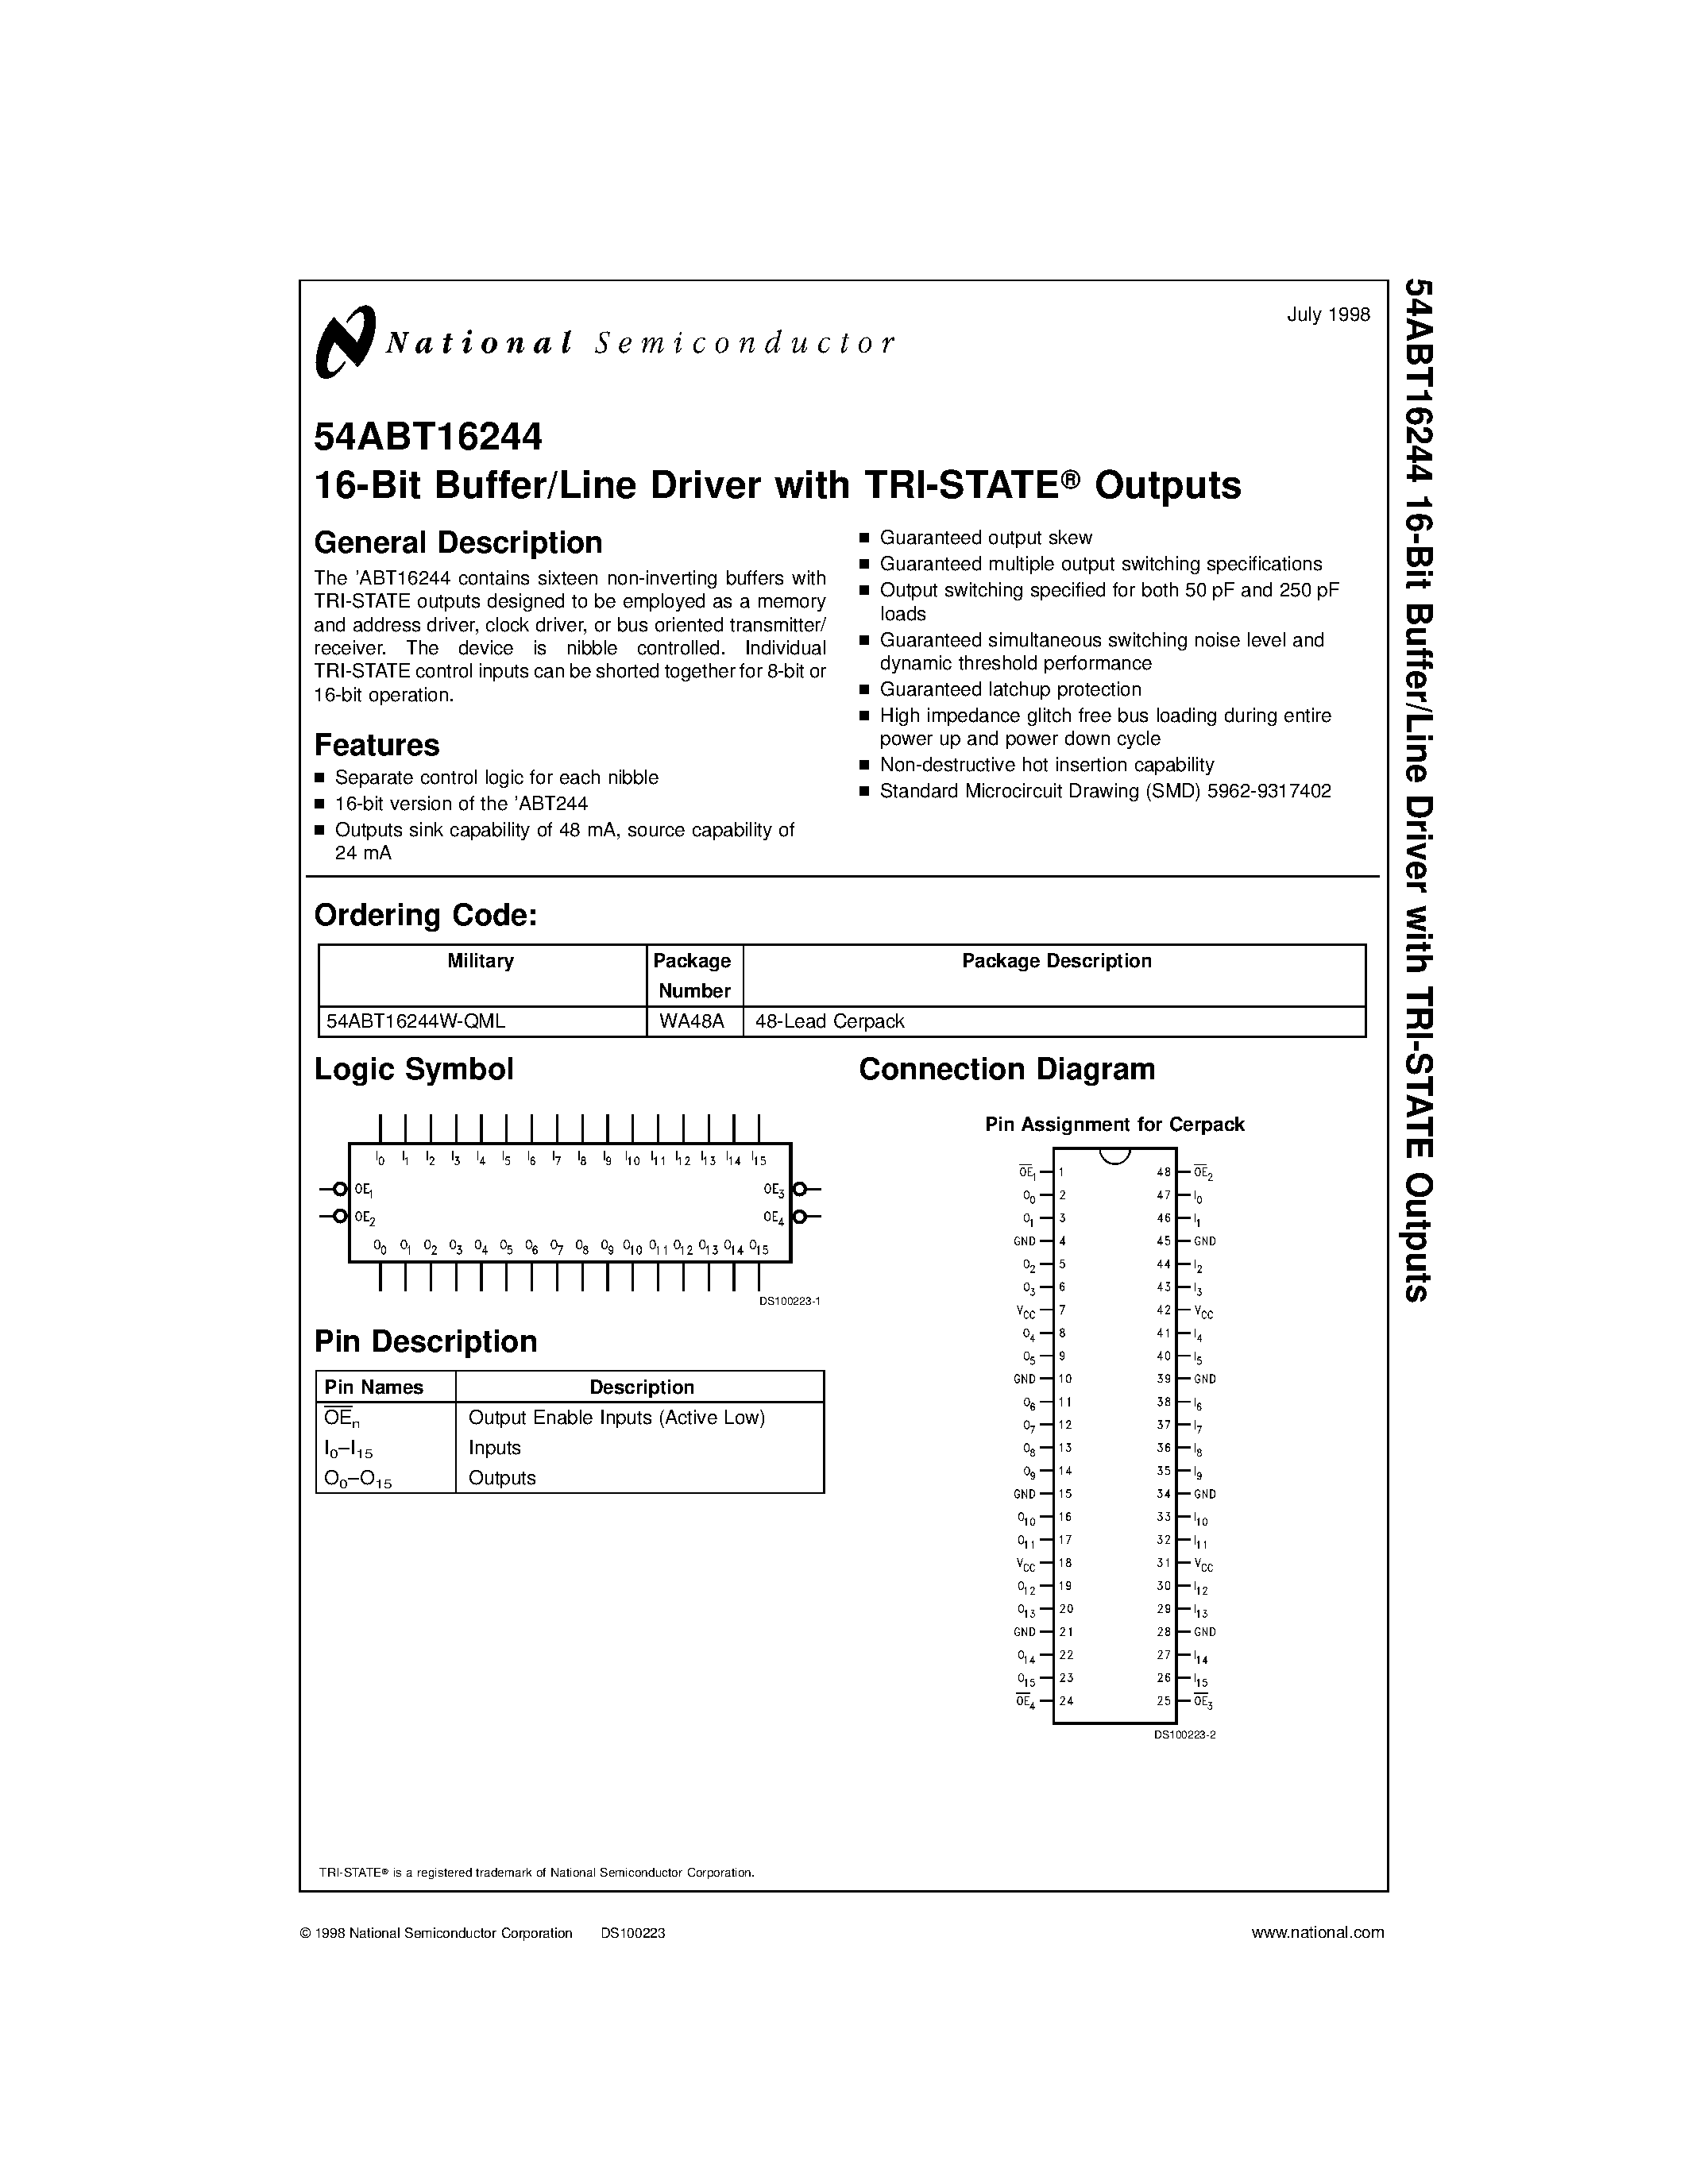 Datasheet 54ABT16244W-QML - 16-Bit Buffer/Line Driver with TRI-STATE Outputs page 1